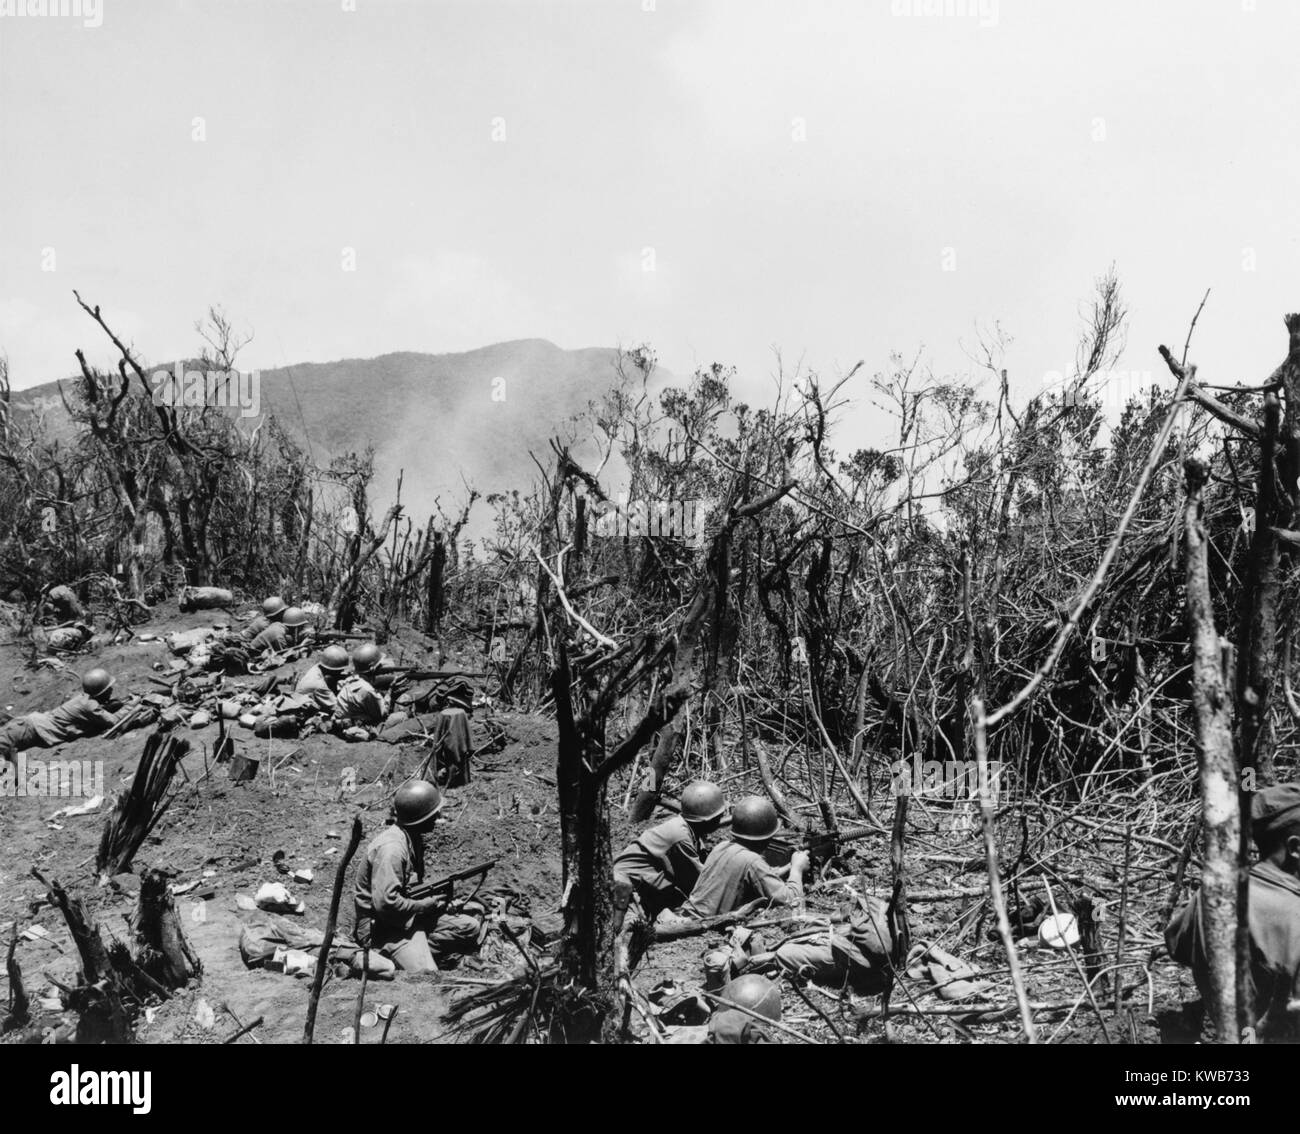 U.S. Troops dug in on Hill 604, Villa Verde Trail, fire on Japanese positions over the next ridge. April 1, 1945. Manila, Luzon Island, Philippines, World War 2. (BSLOC 2014 10 113) Stock Photo